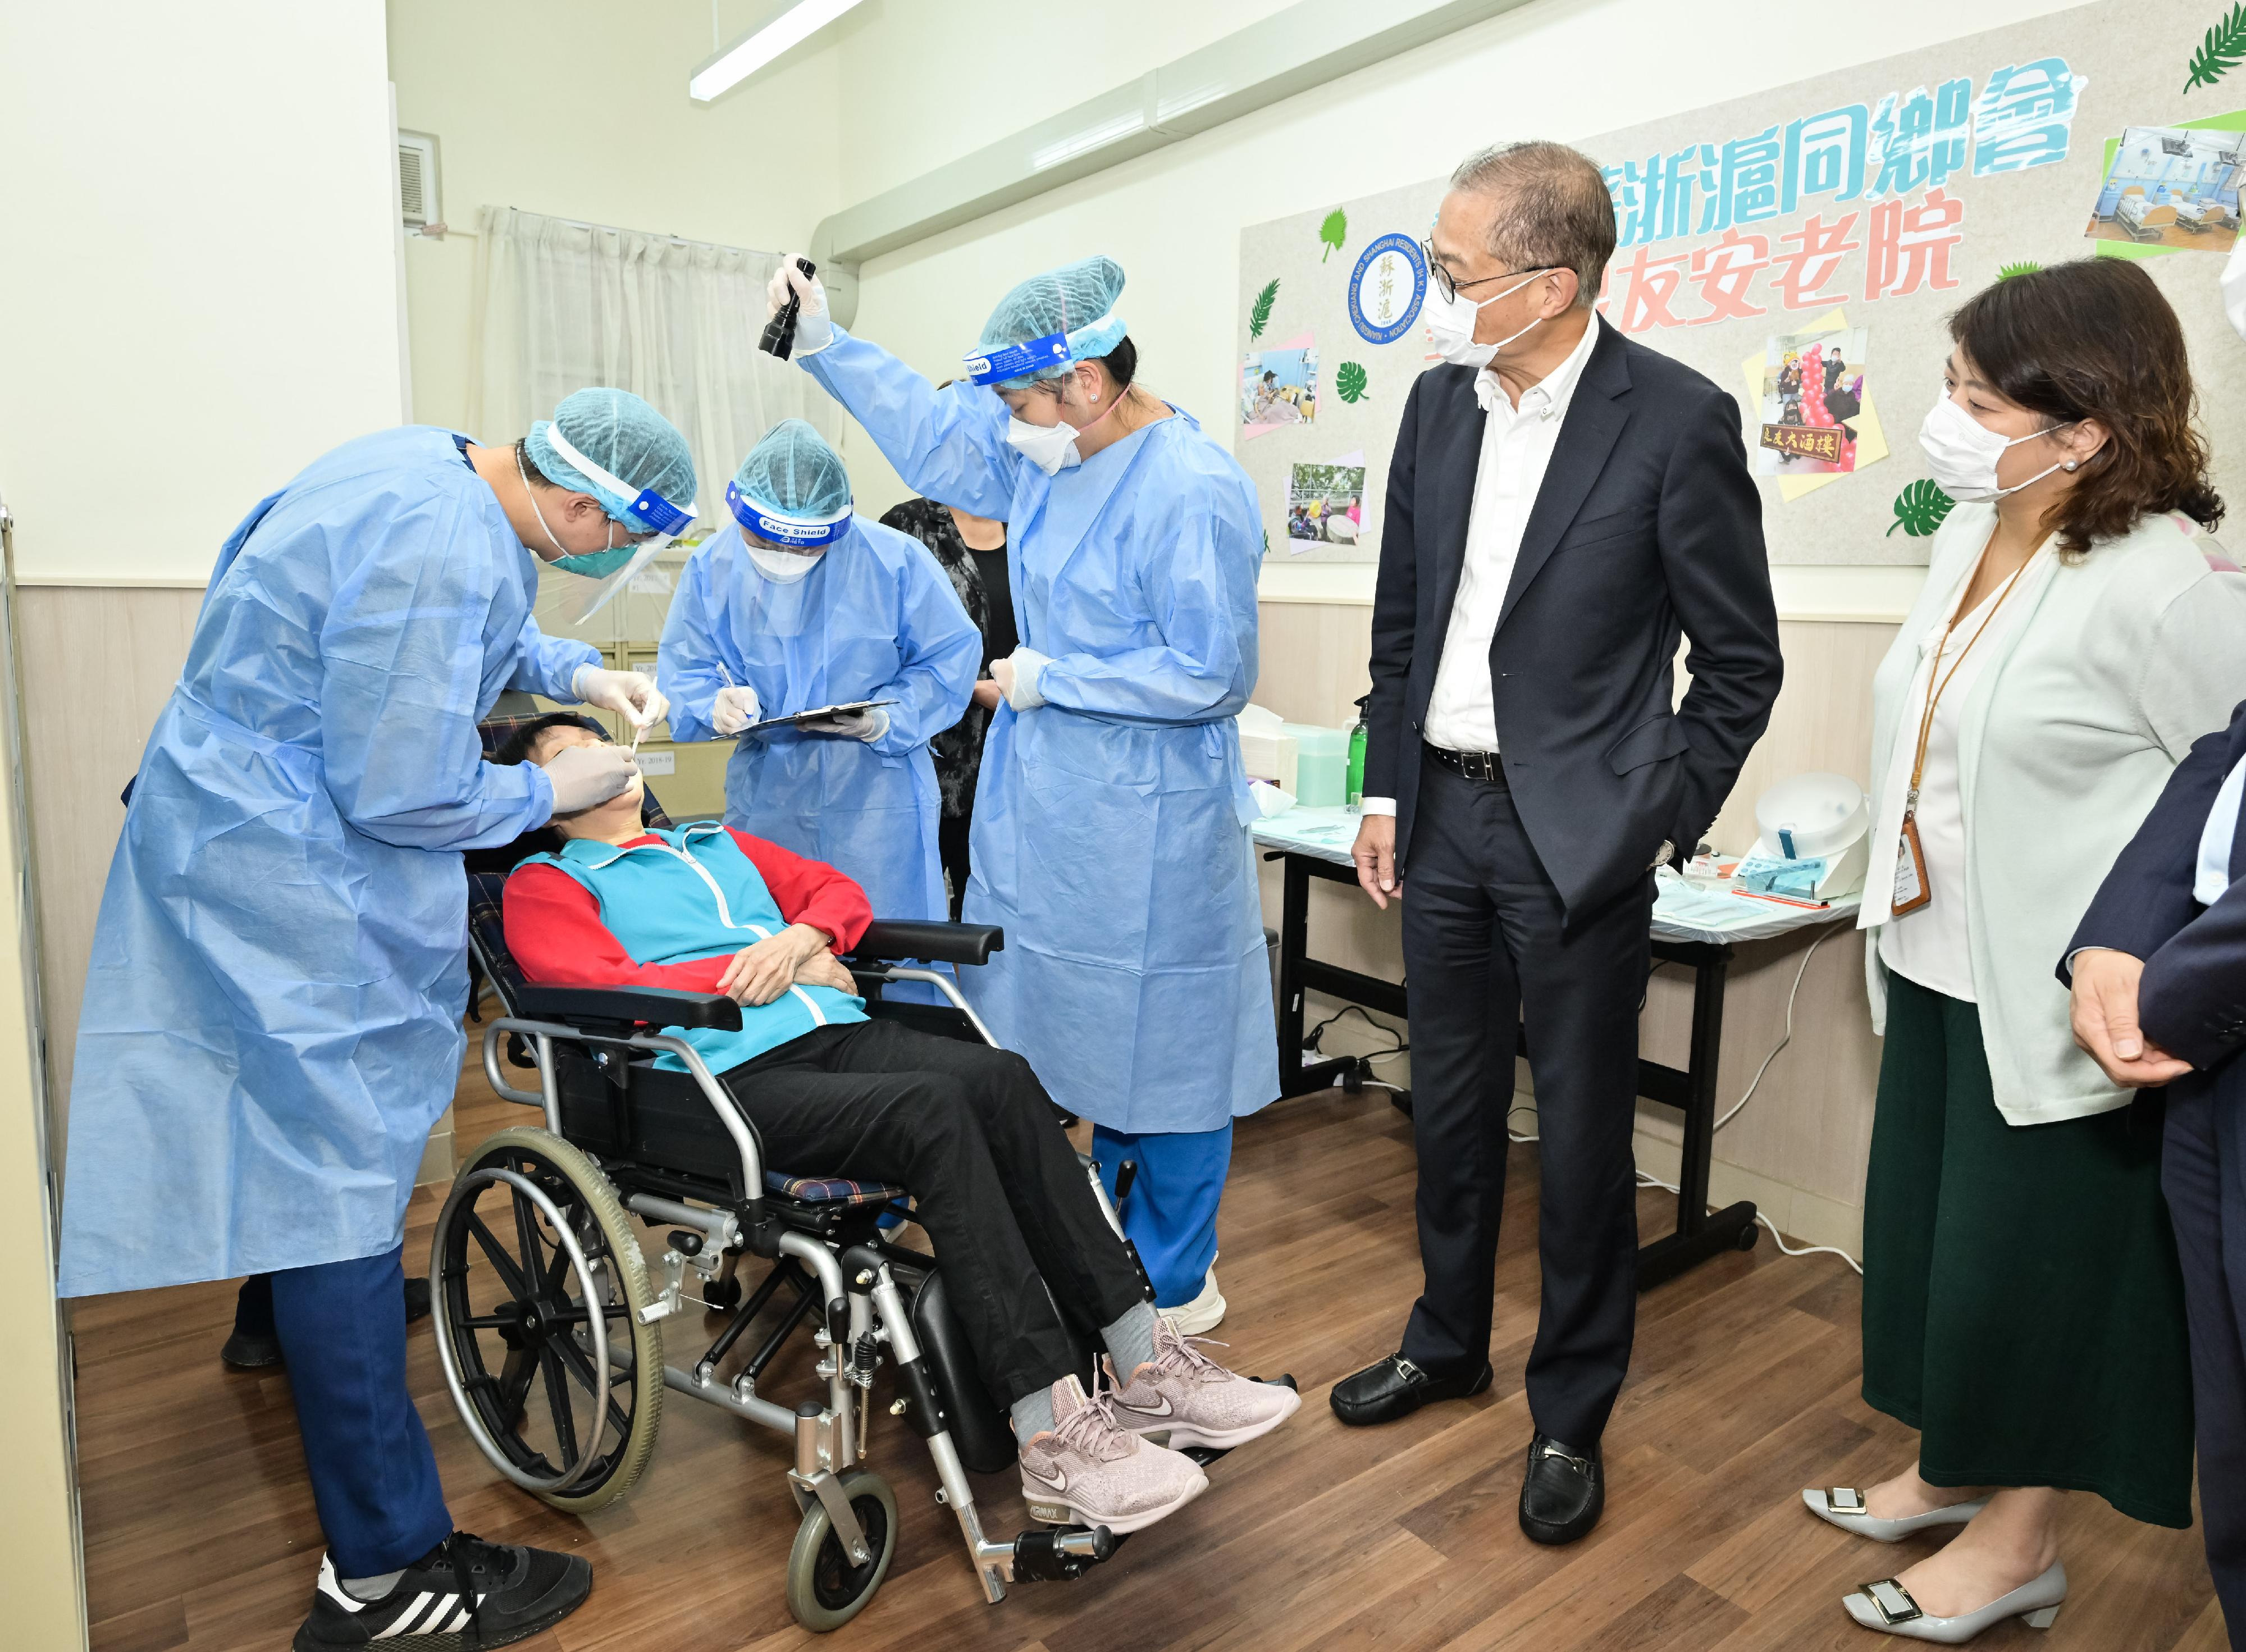 The Secretary for Health, Professor Lo Chung-mau (second right), and the Under Secretary for Health, Dr Libby Lee (first right), inspect the basic dental care services provided to residents of a residential care home for the elderly in Kwai Tsing District by the outreach dental team during their visit there this afternoon (November 3).